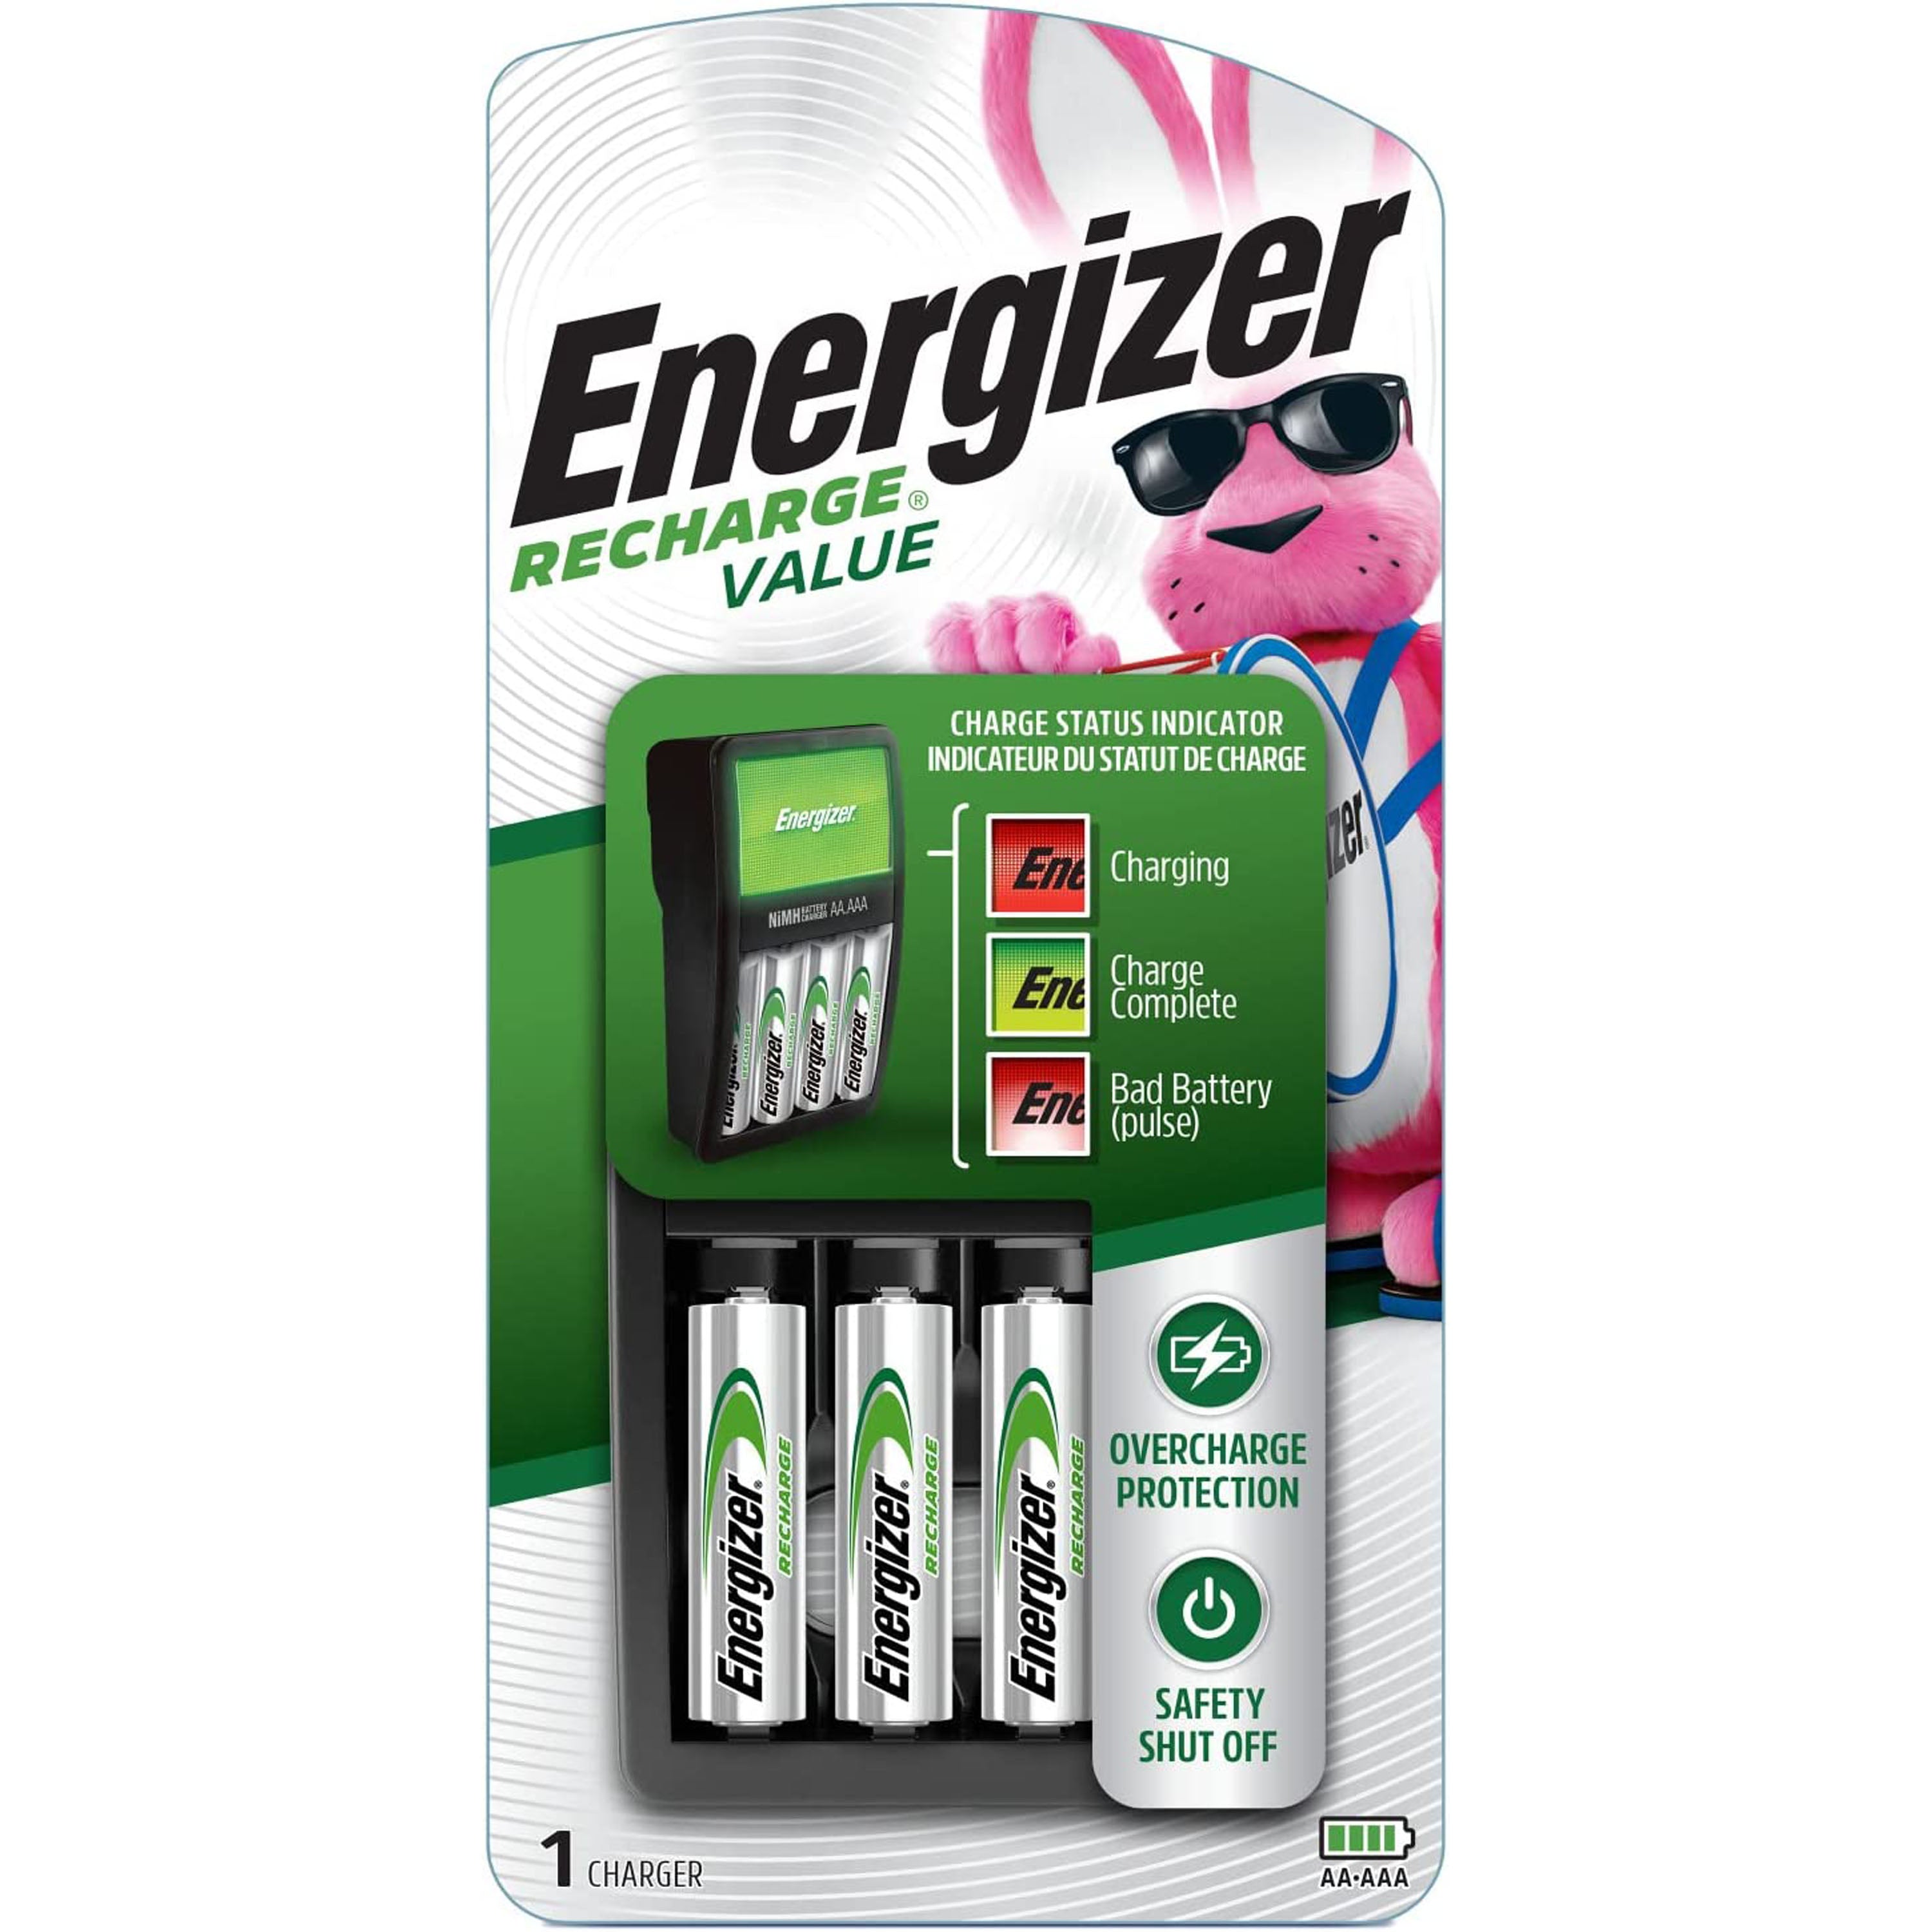 Energizer RECHARGE Value Charger with 4 AA